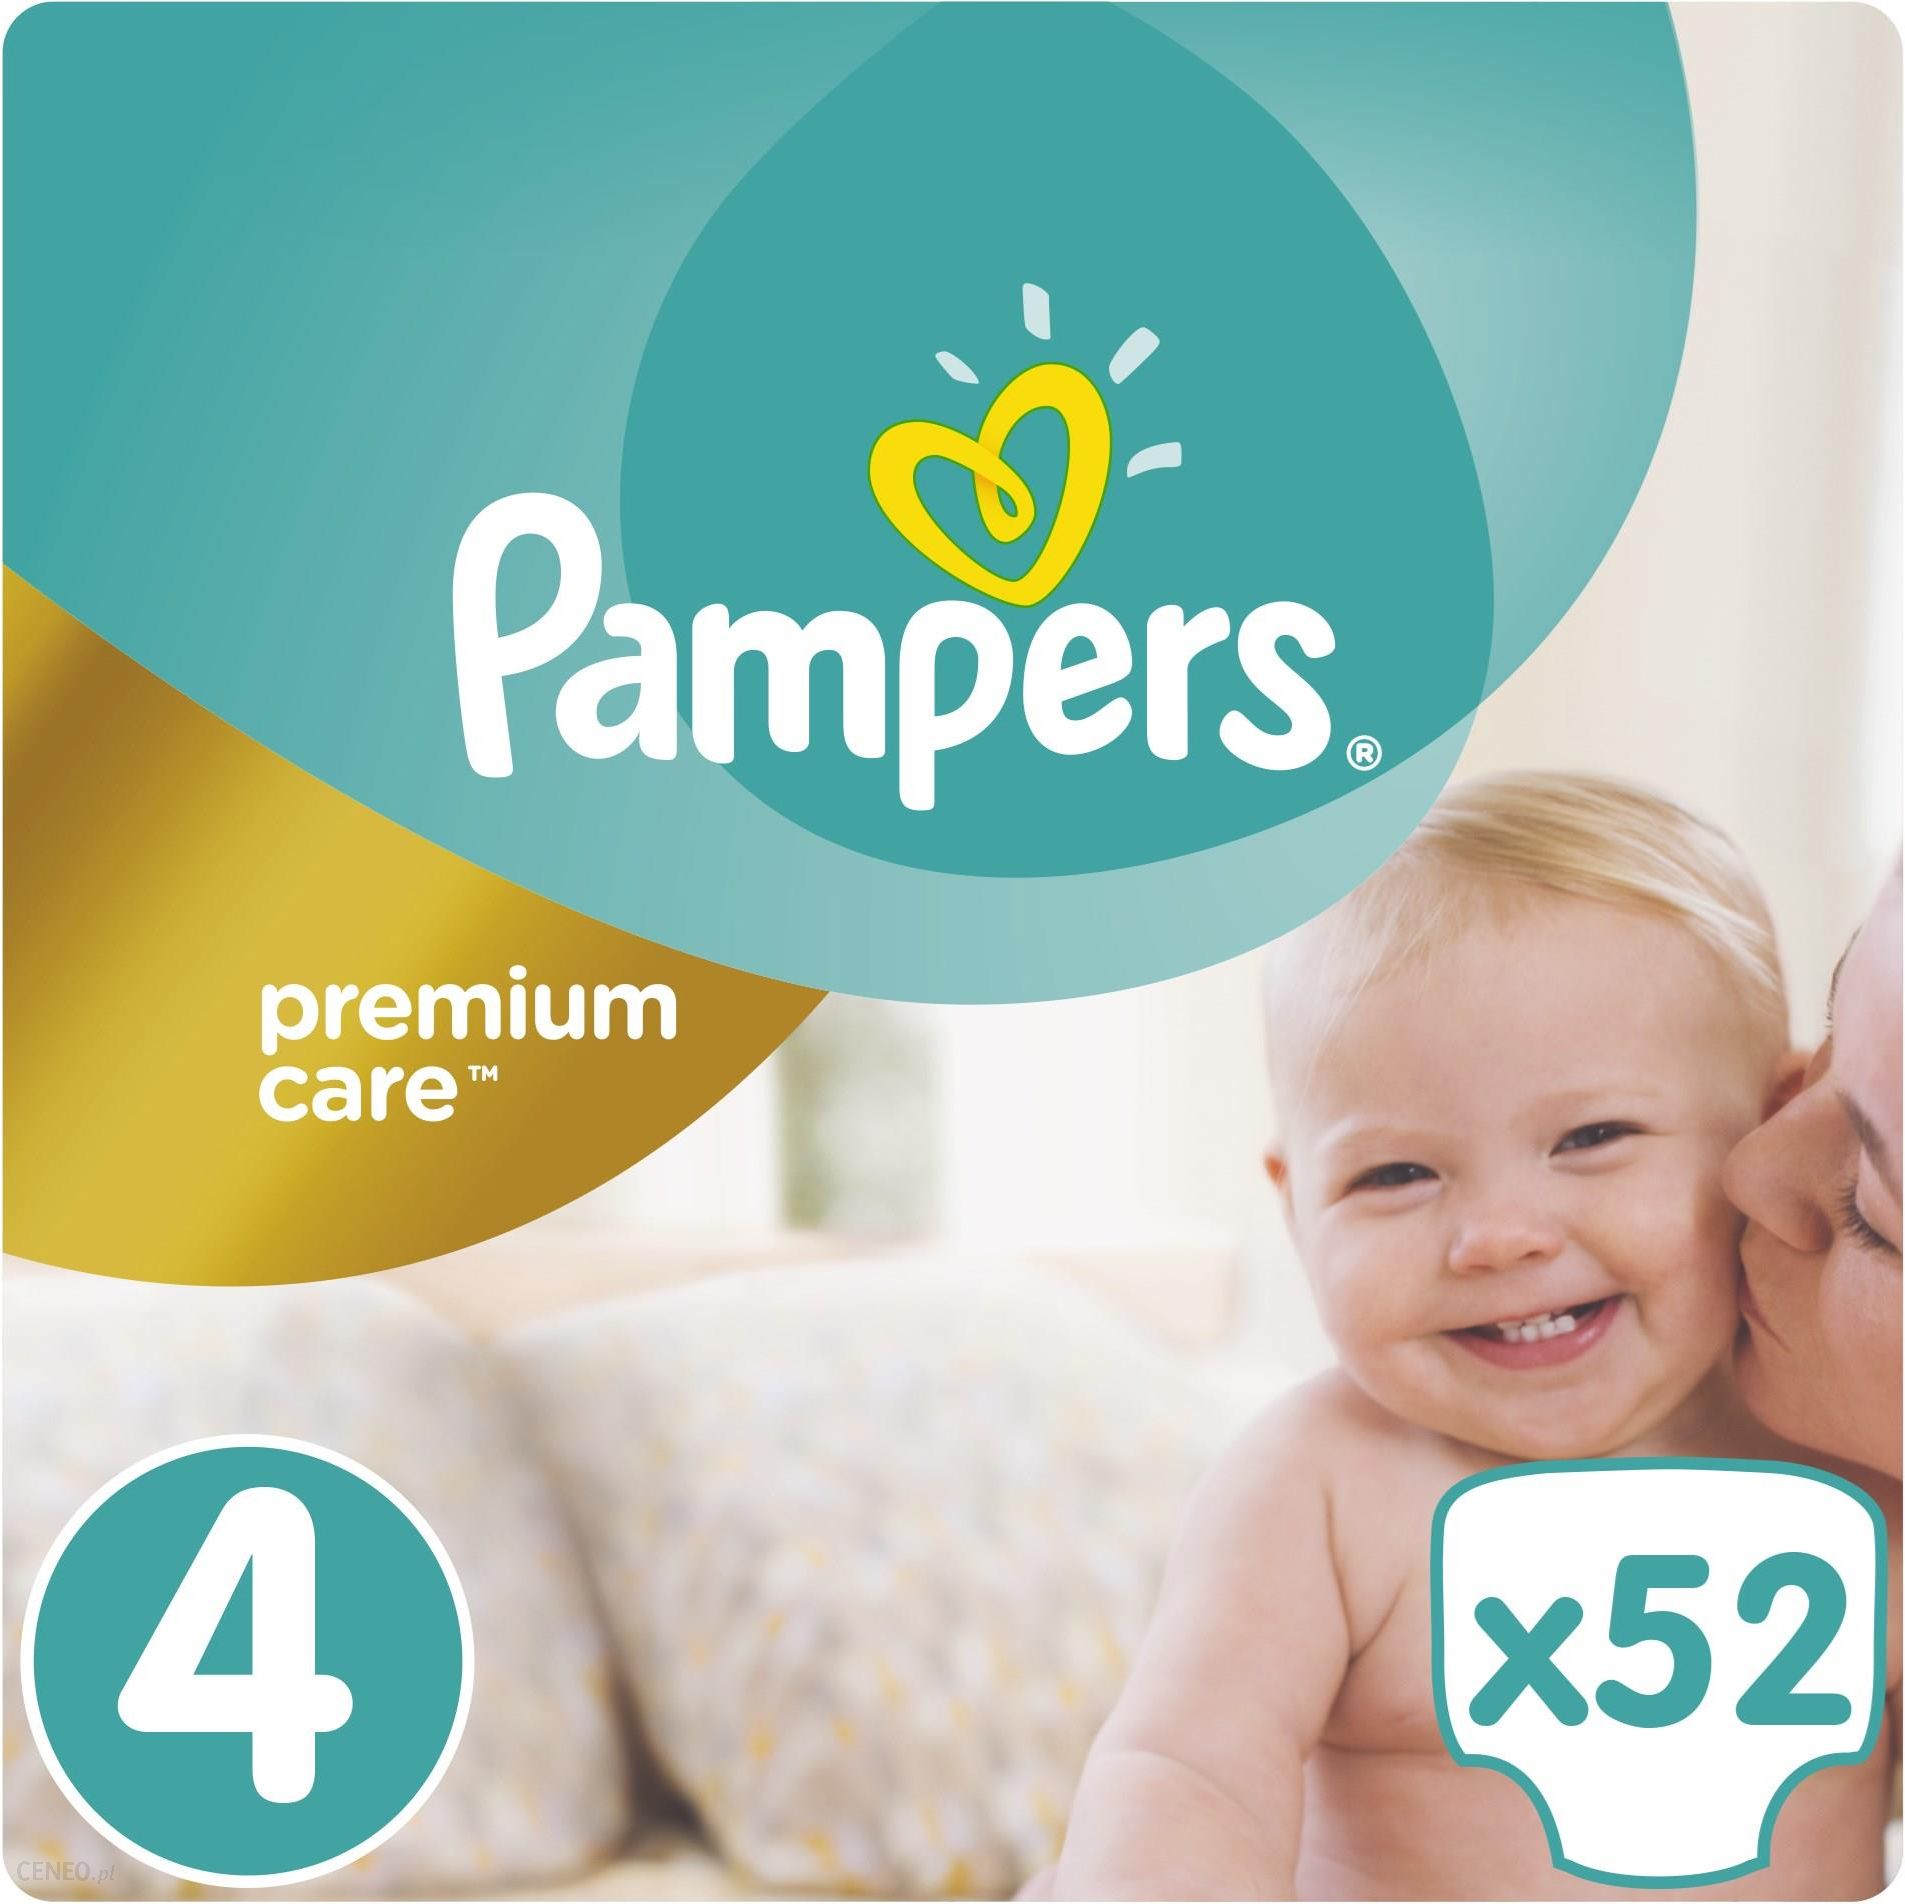 tanie pampersy pampers